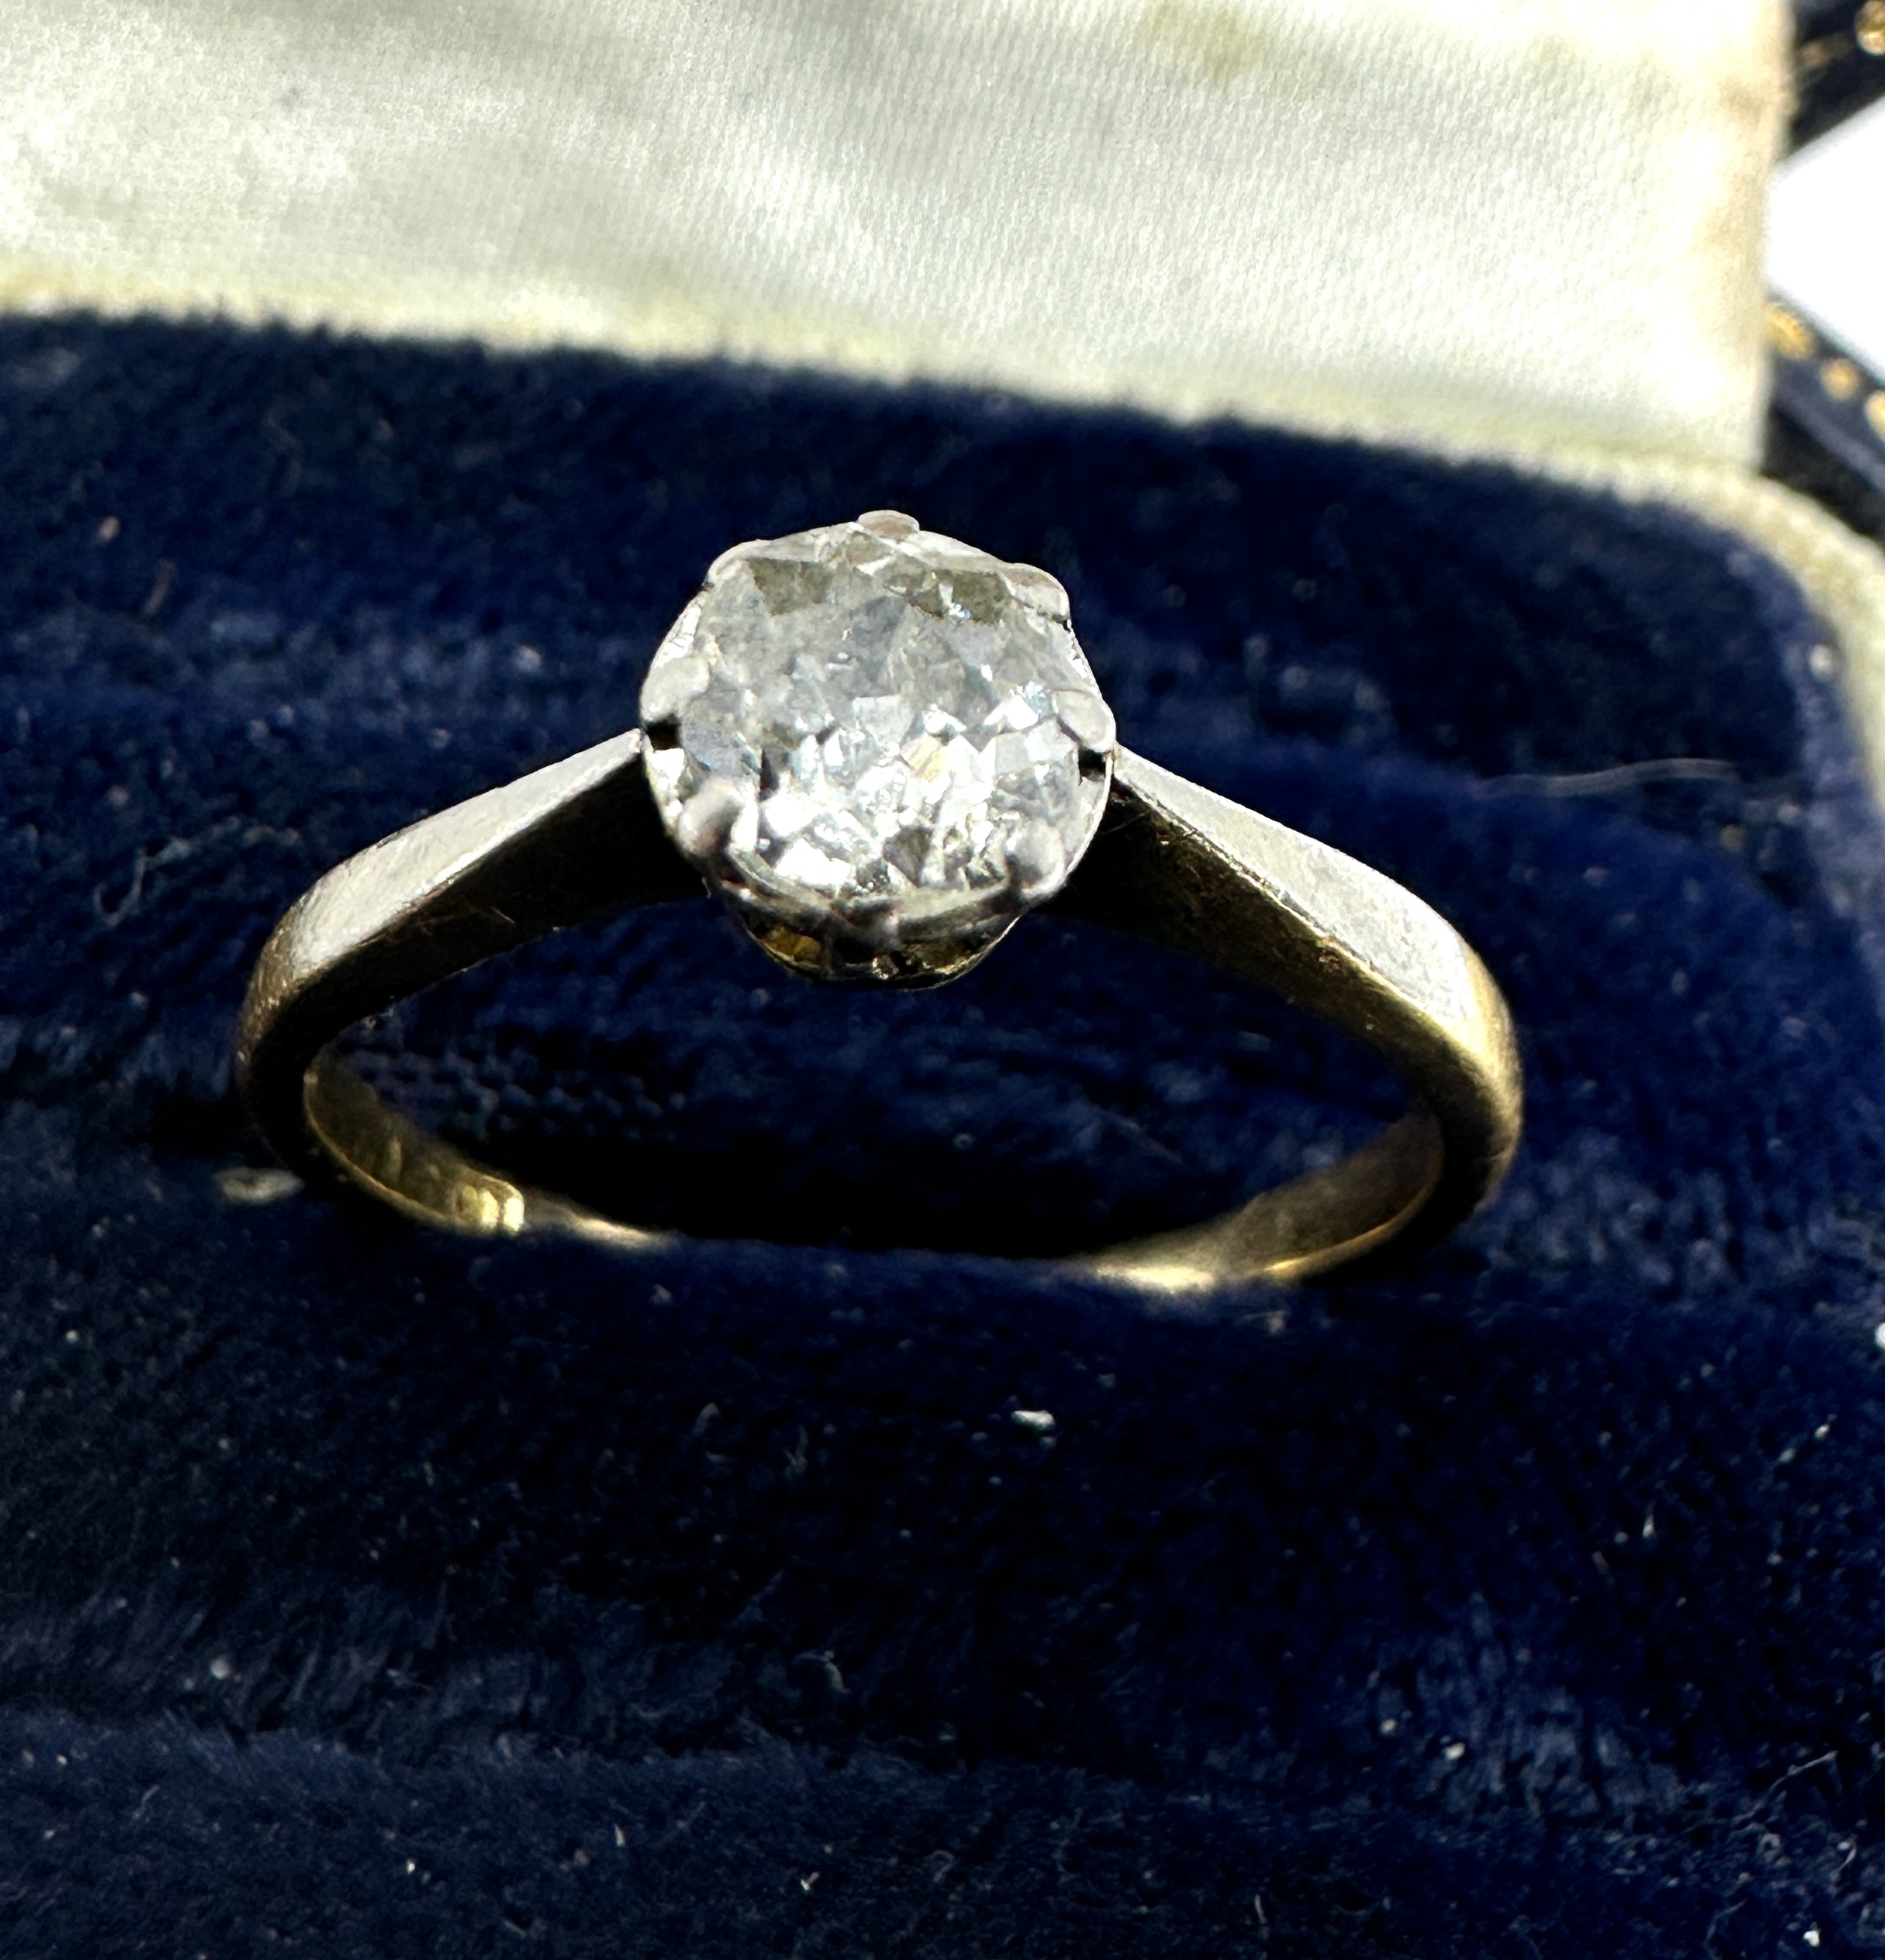 Antique 18ct gold old cut diamond ring diamond measures approx 5.5mm dia est .60 ct weight 2.2g